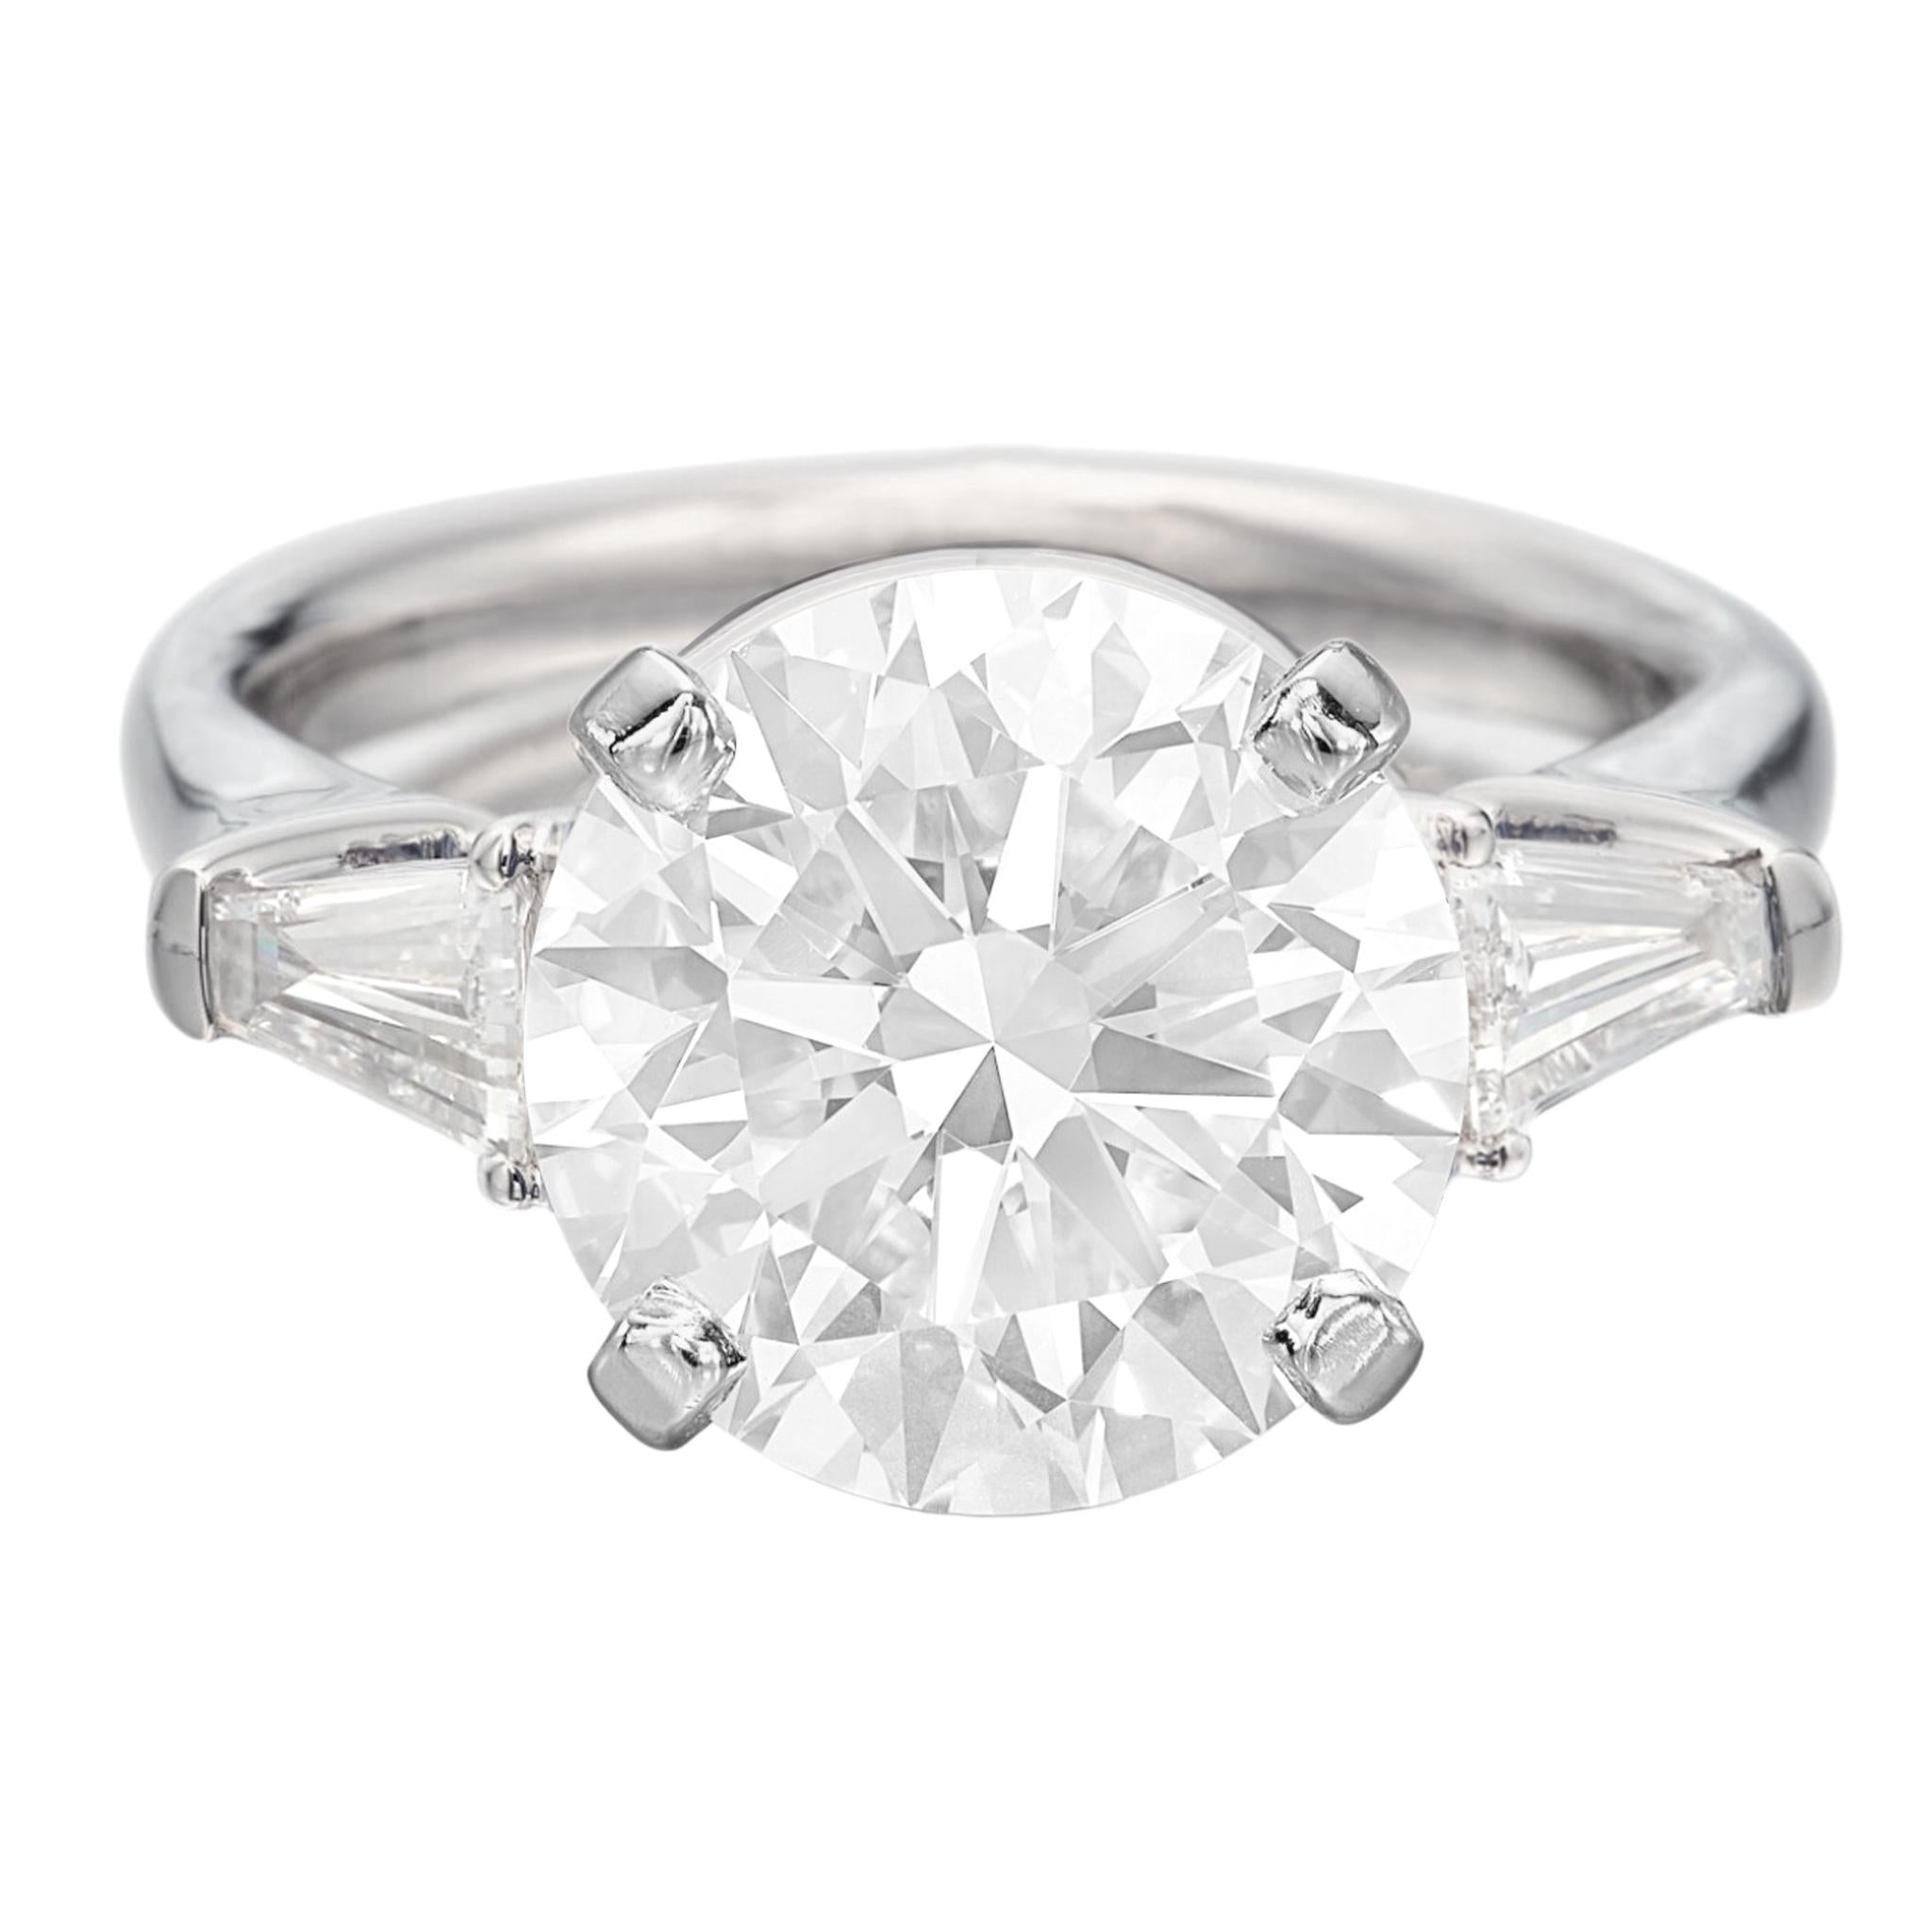 Contemporary GIA Certifield 5 Carat Round Brilliant Cut Diamond Ring with tapered baguette For Sale